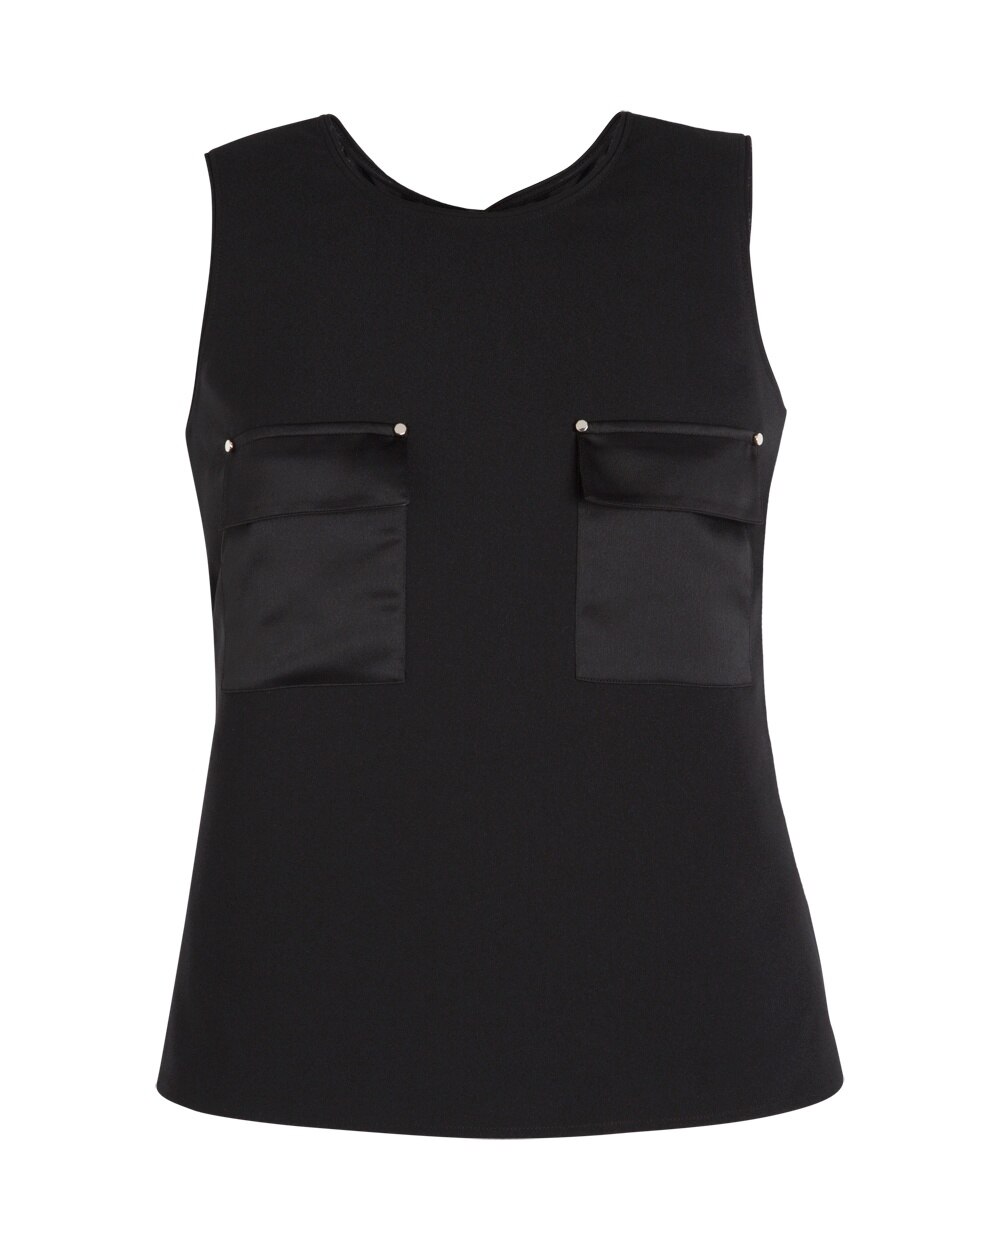 Sleeveless Cropped Shell - Shop Women's Tops - Blouses, Shirts, Camis ...